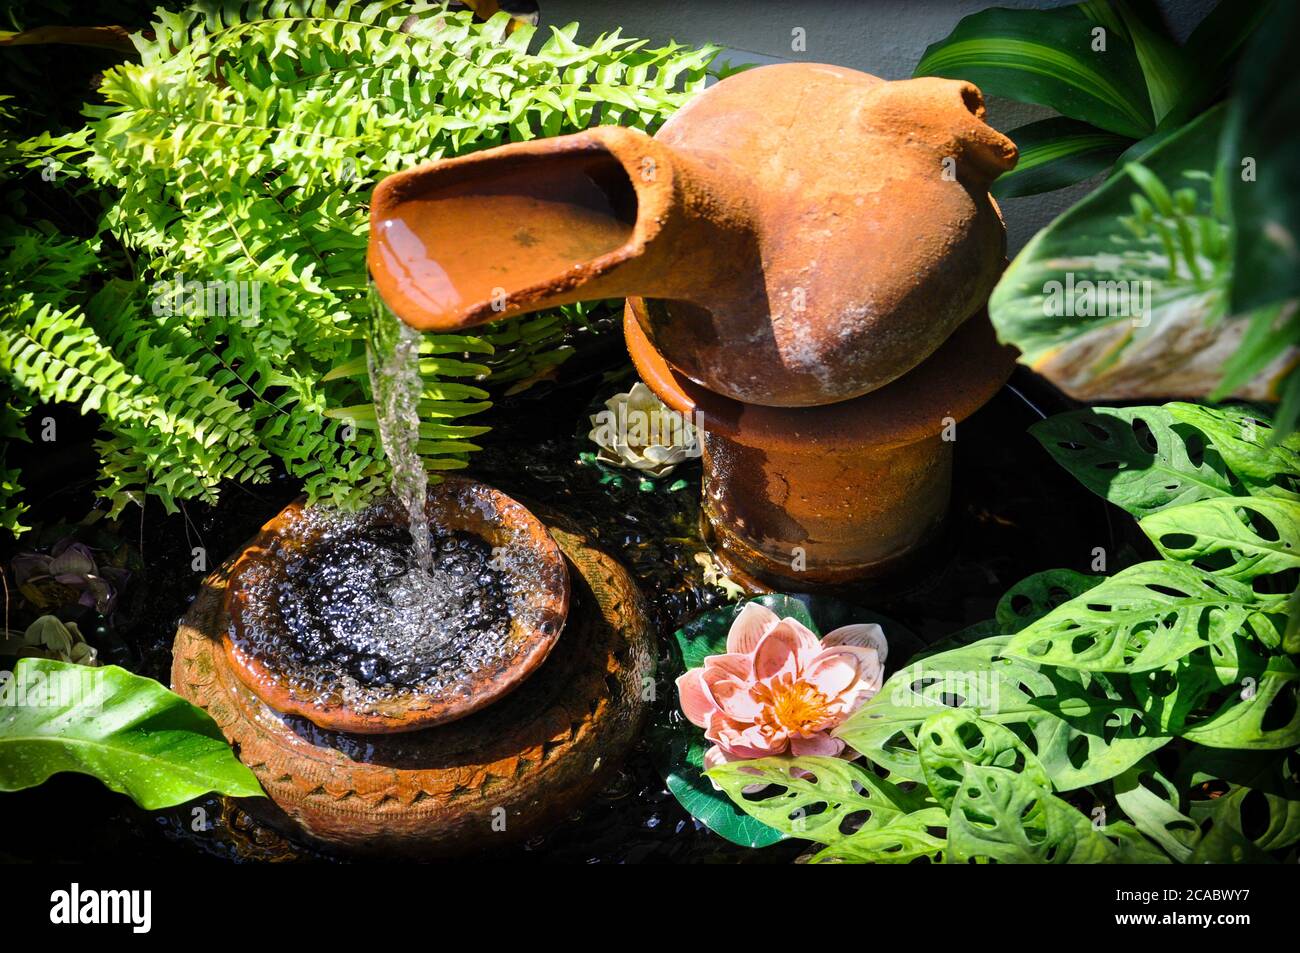 Cascading terracotta garden feature in a small courtyard patio setting, with lush tropical greenery, ferns and water lillies. Stock Photo